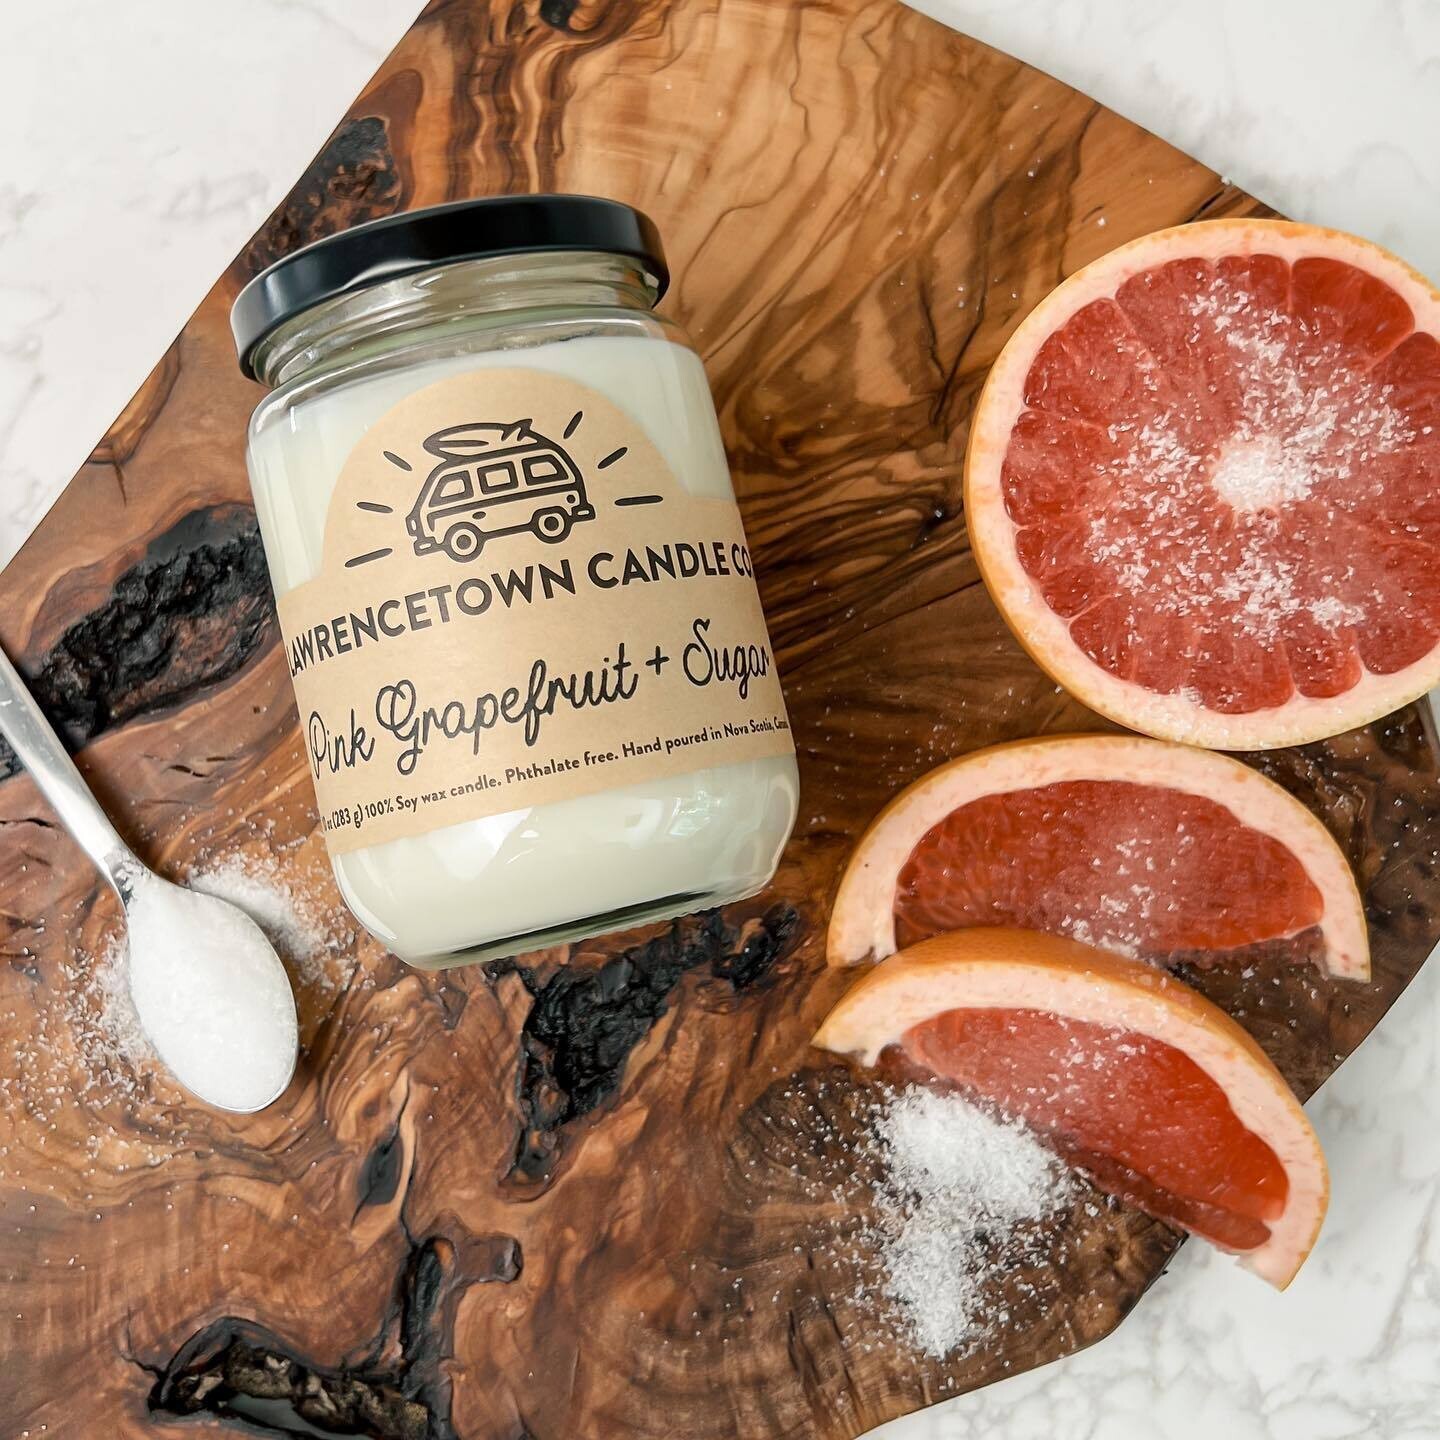 Pink Grapefruit and Sugar 10oz Candle - Lawrencetown Candle Co